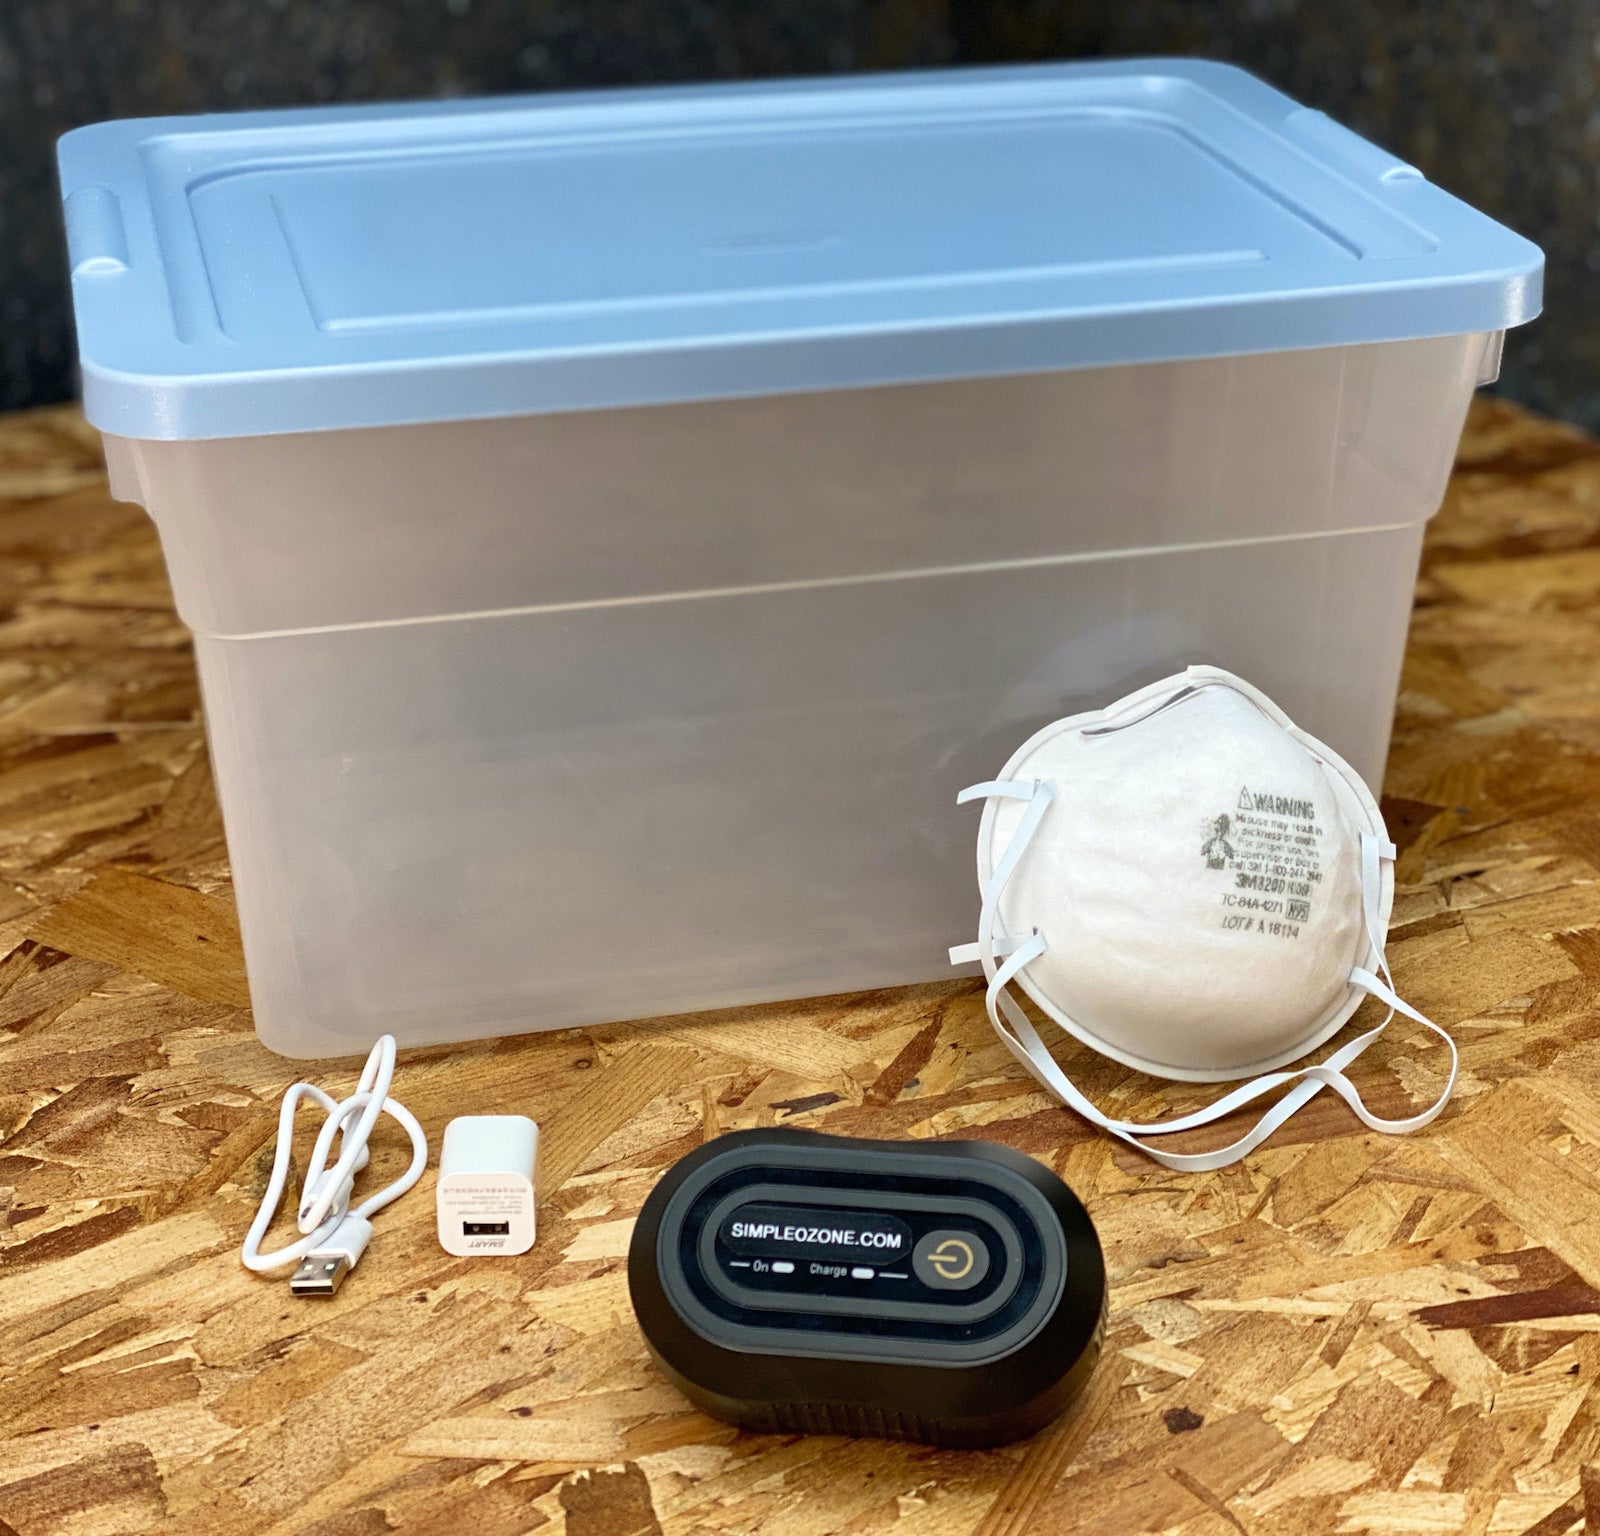 Plastic container, N-95 mask, USB cord and wall outlet, ozone device